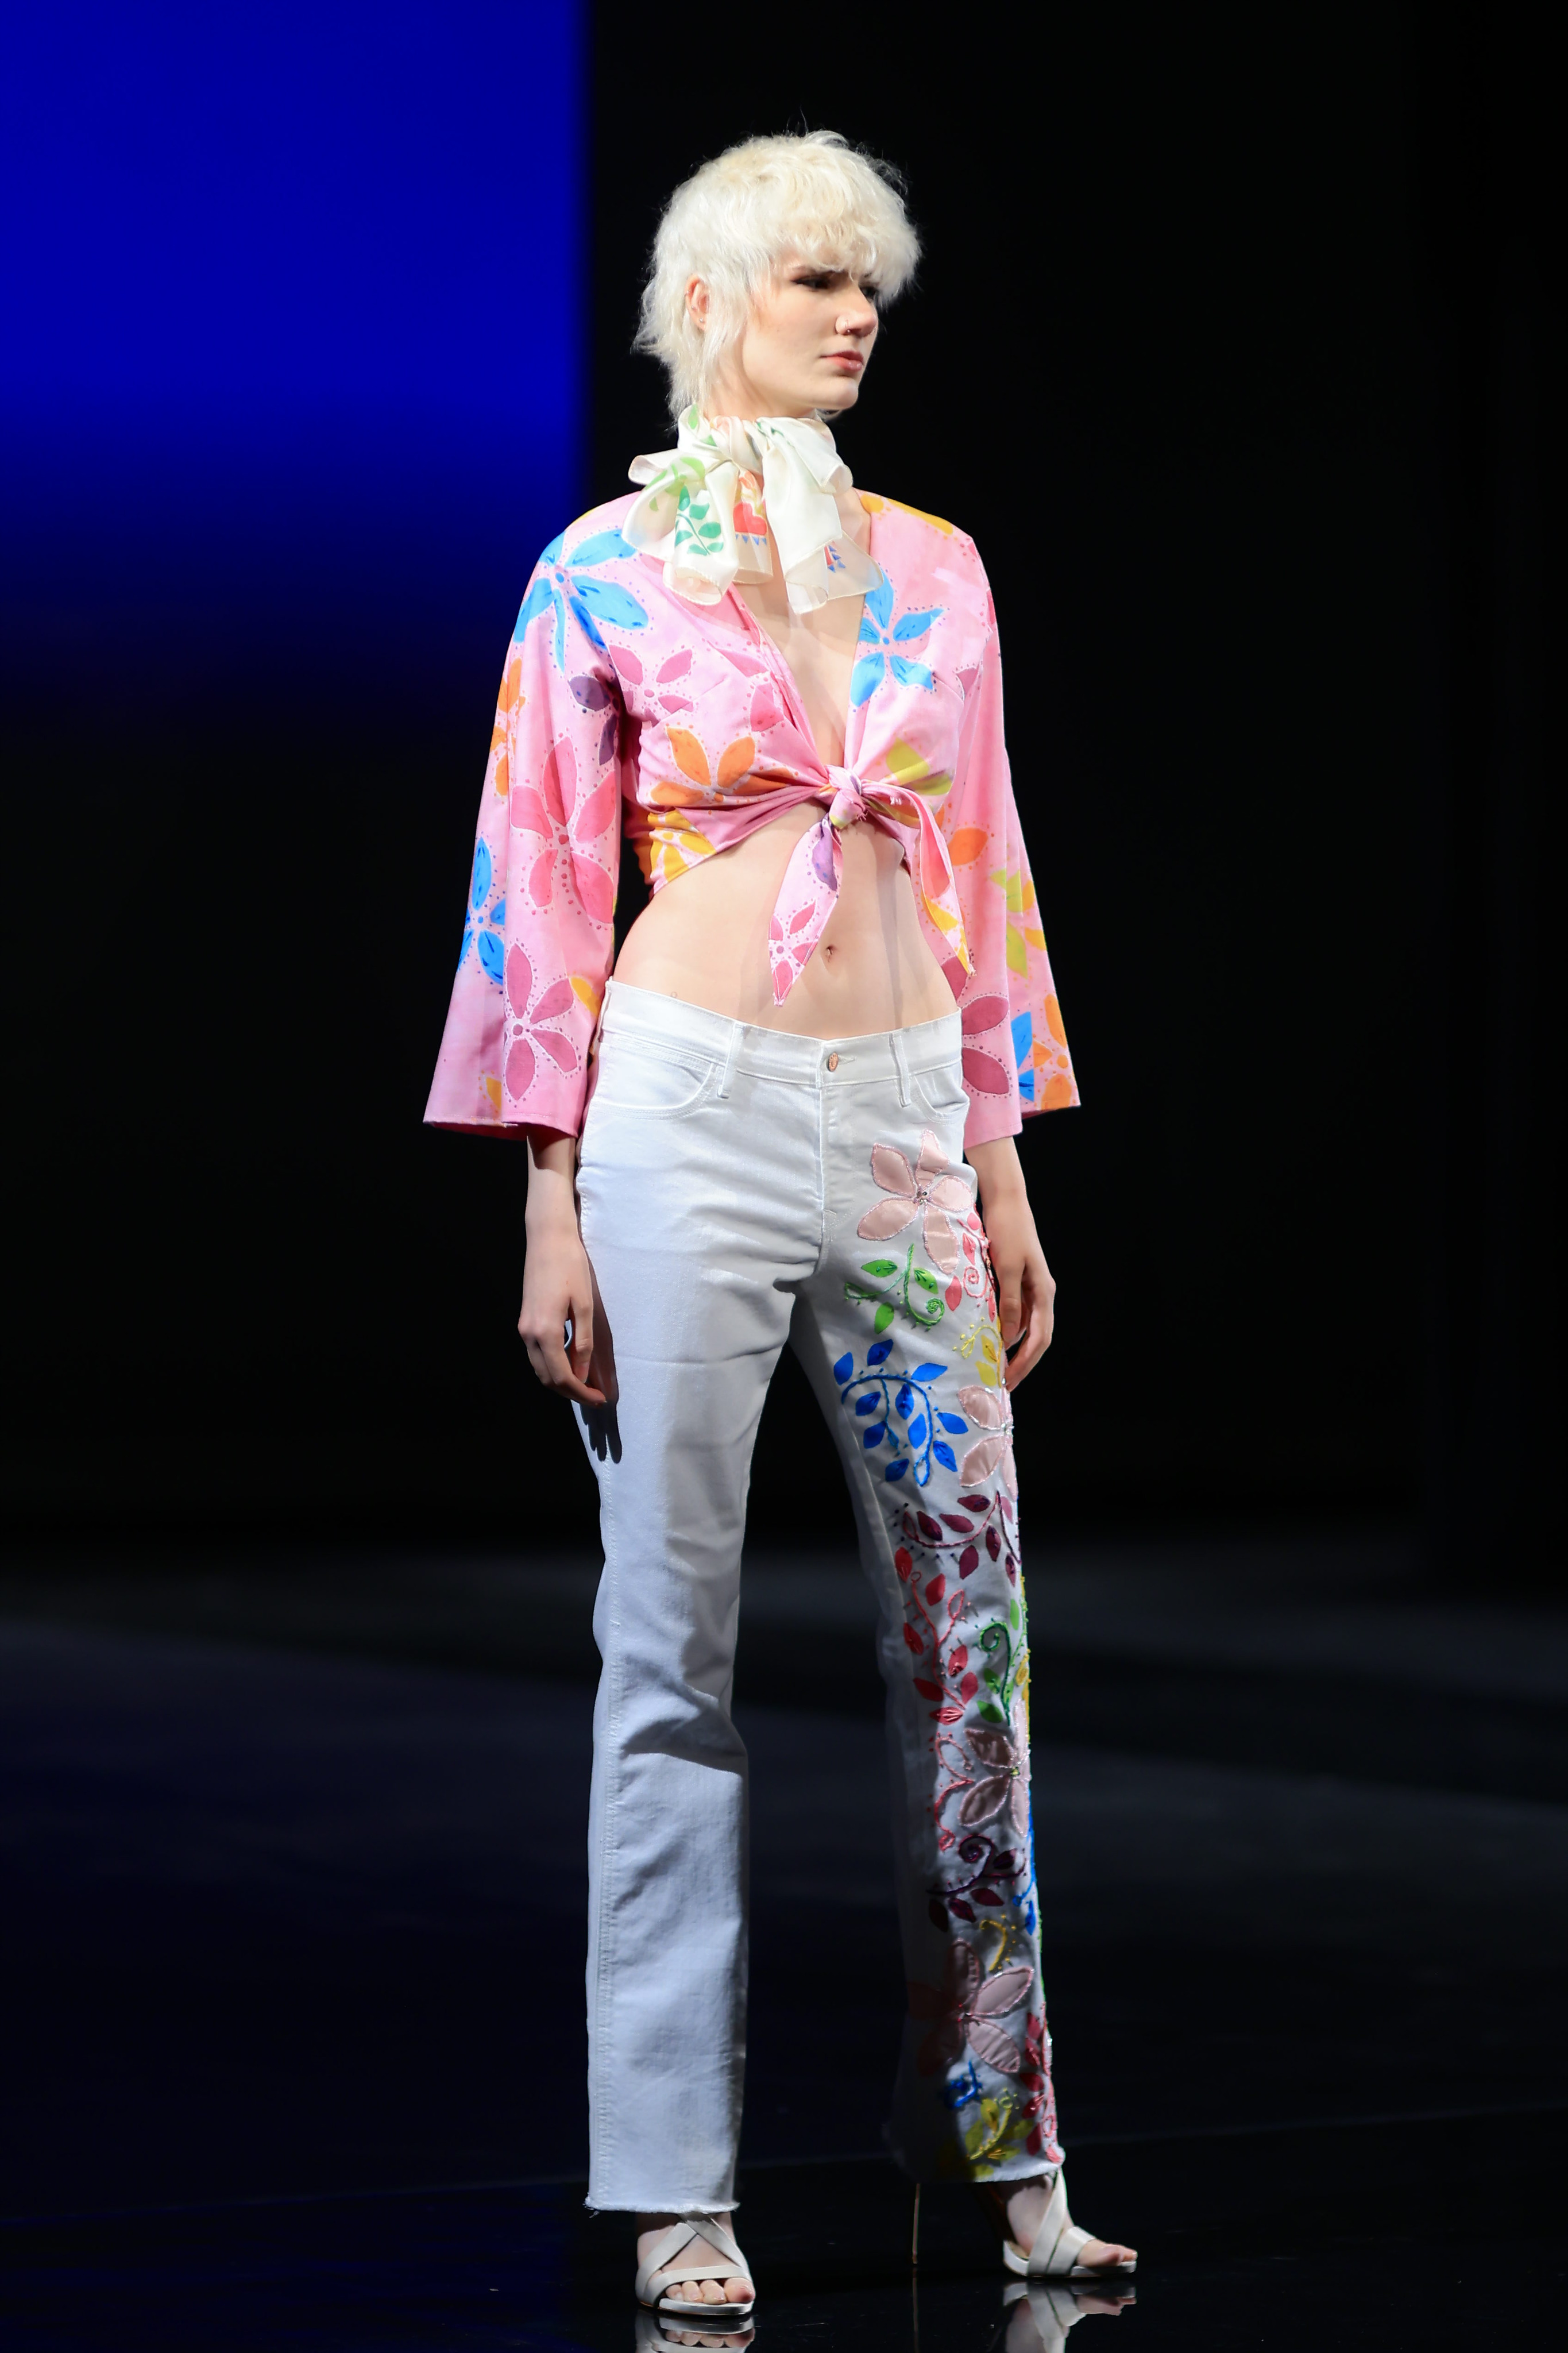 A model wears a chic ensemble: a white scarf with a colorful floral pattern, a pink tied cropped top with matching floral design, light-washed denim jeans with a floral-covered left leg, and elegant silver-strapped heels.